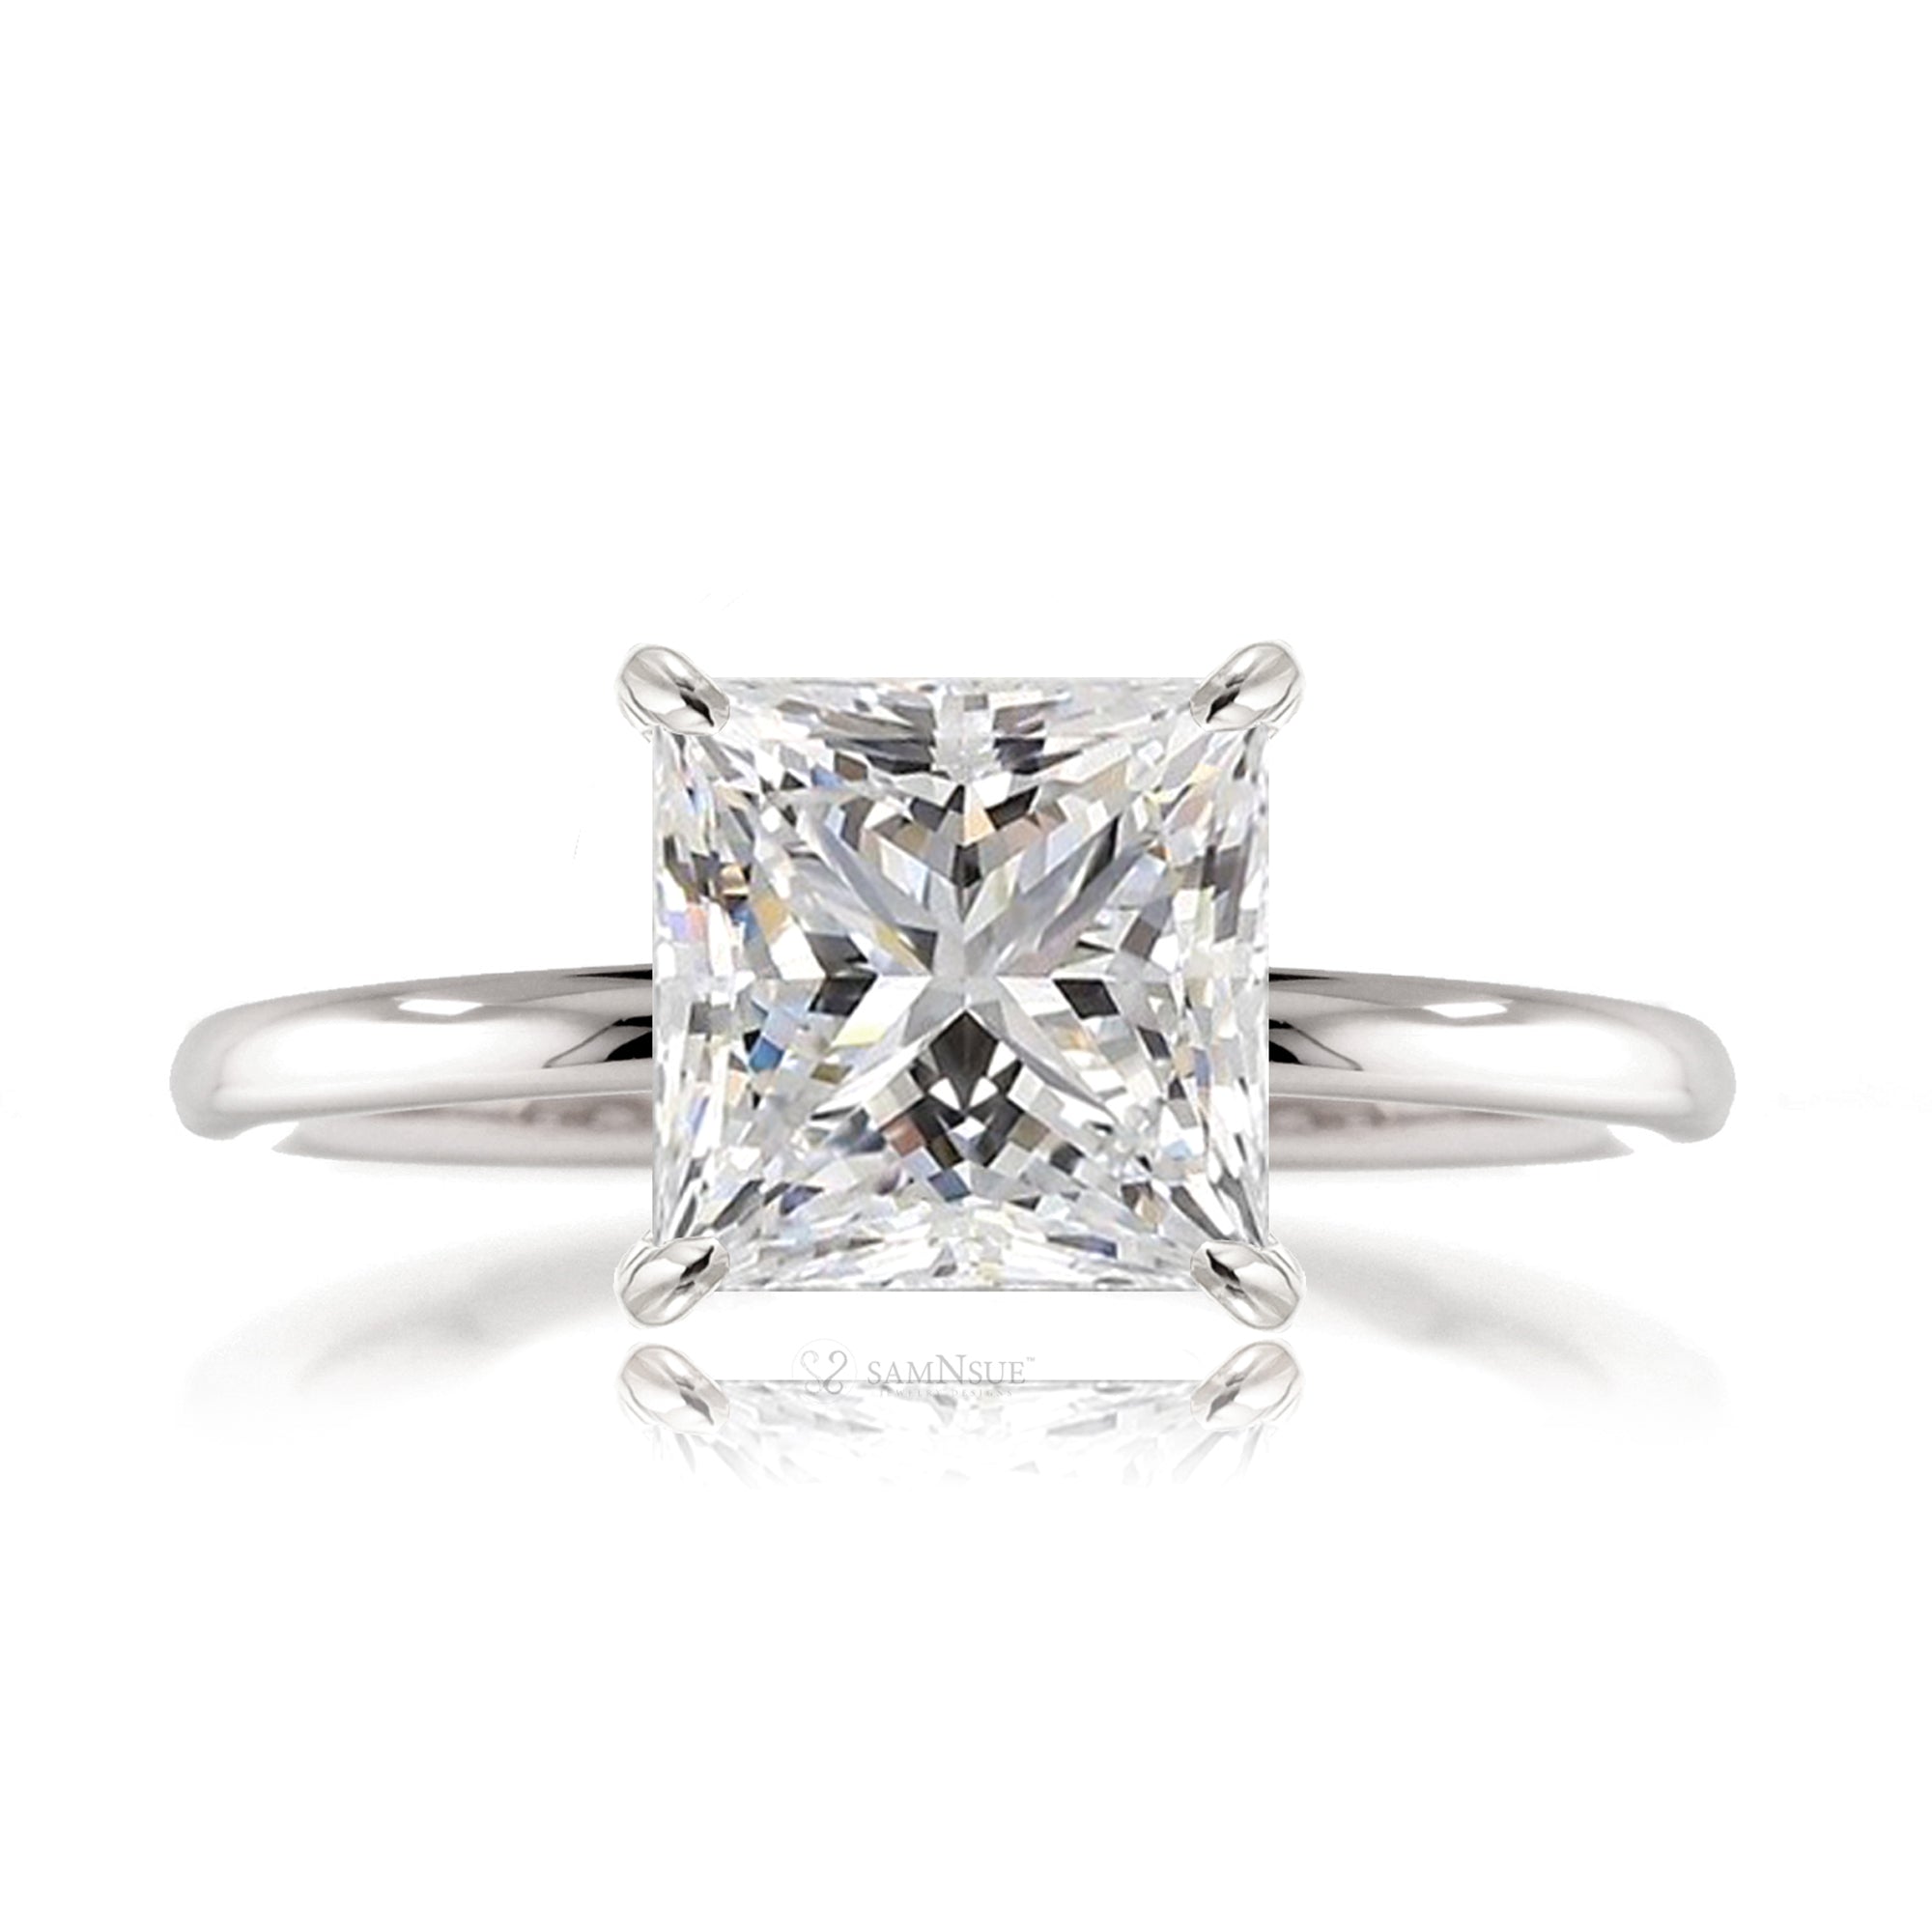 Princess cut lab-grown diamond engagement ring white gold - The Ava solid band